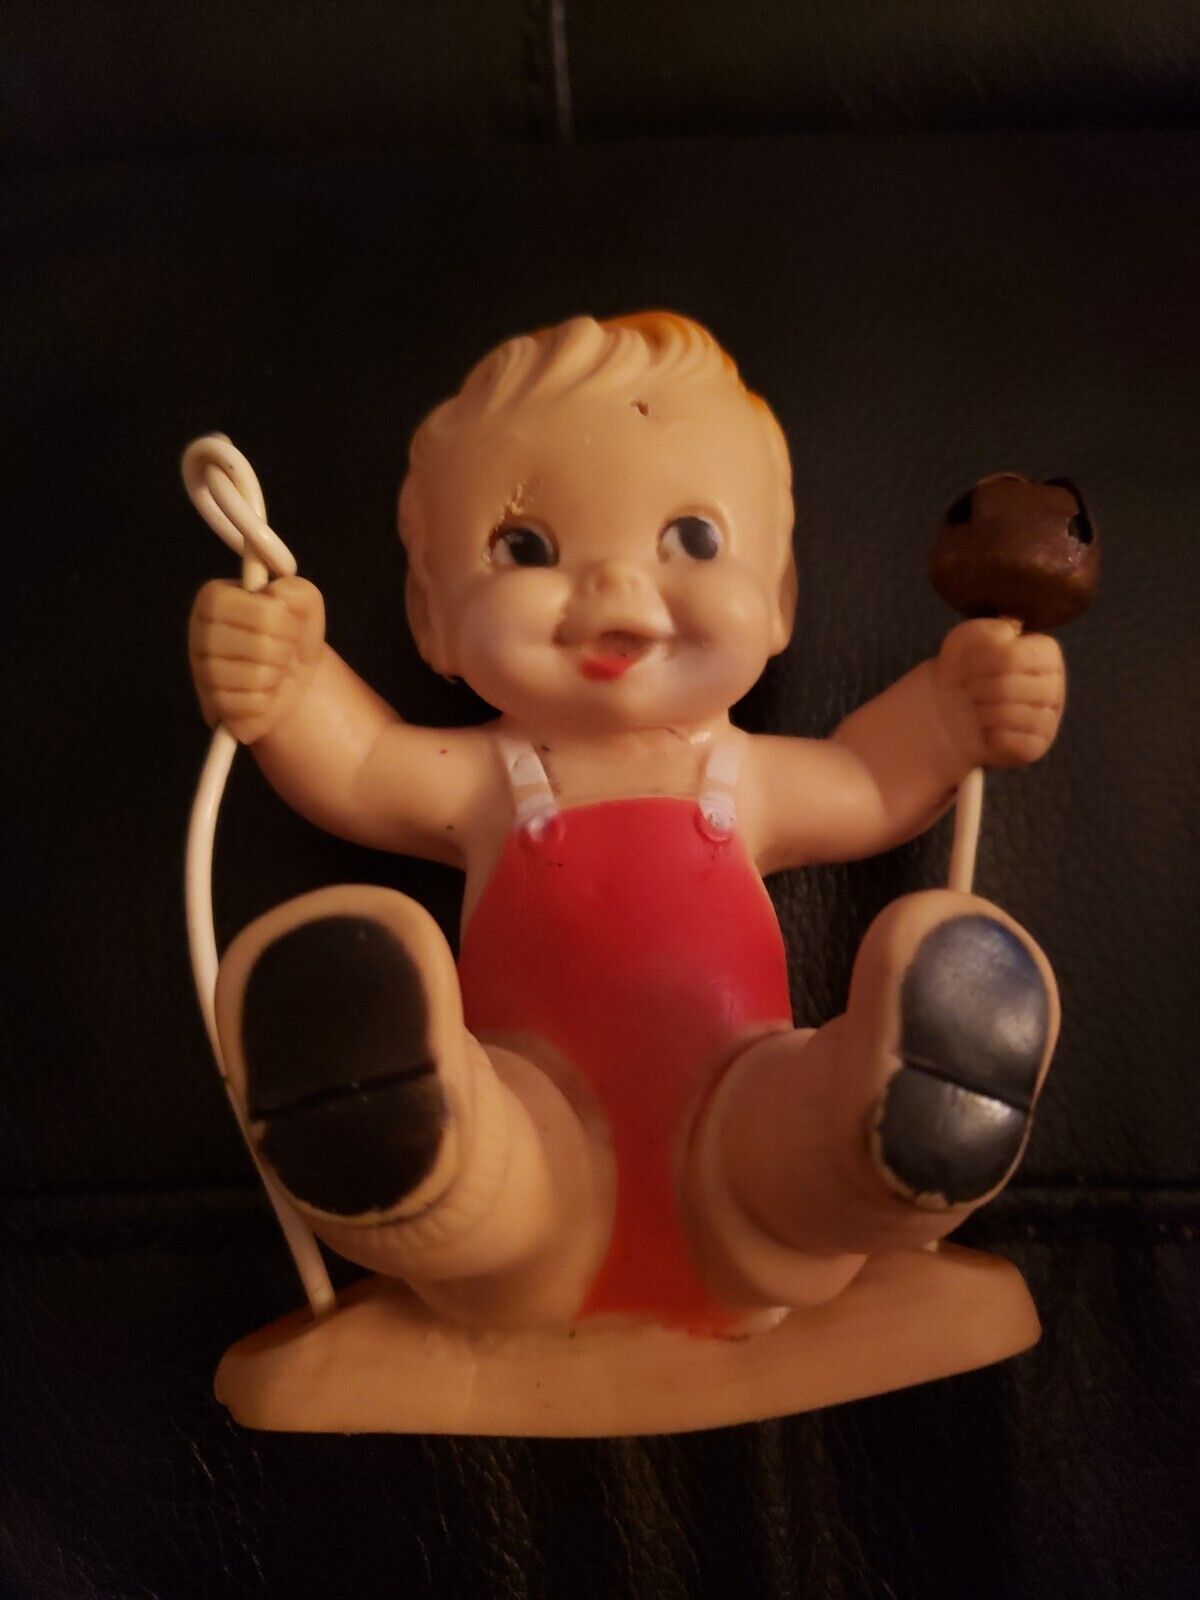 Vintage Rubber Squeeze Toy Boy Swinging West Germany?